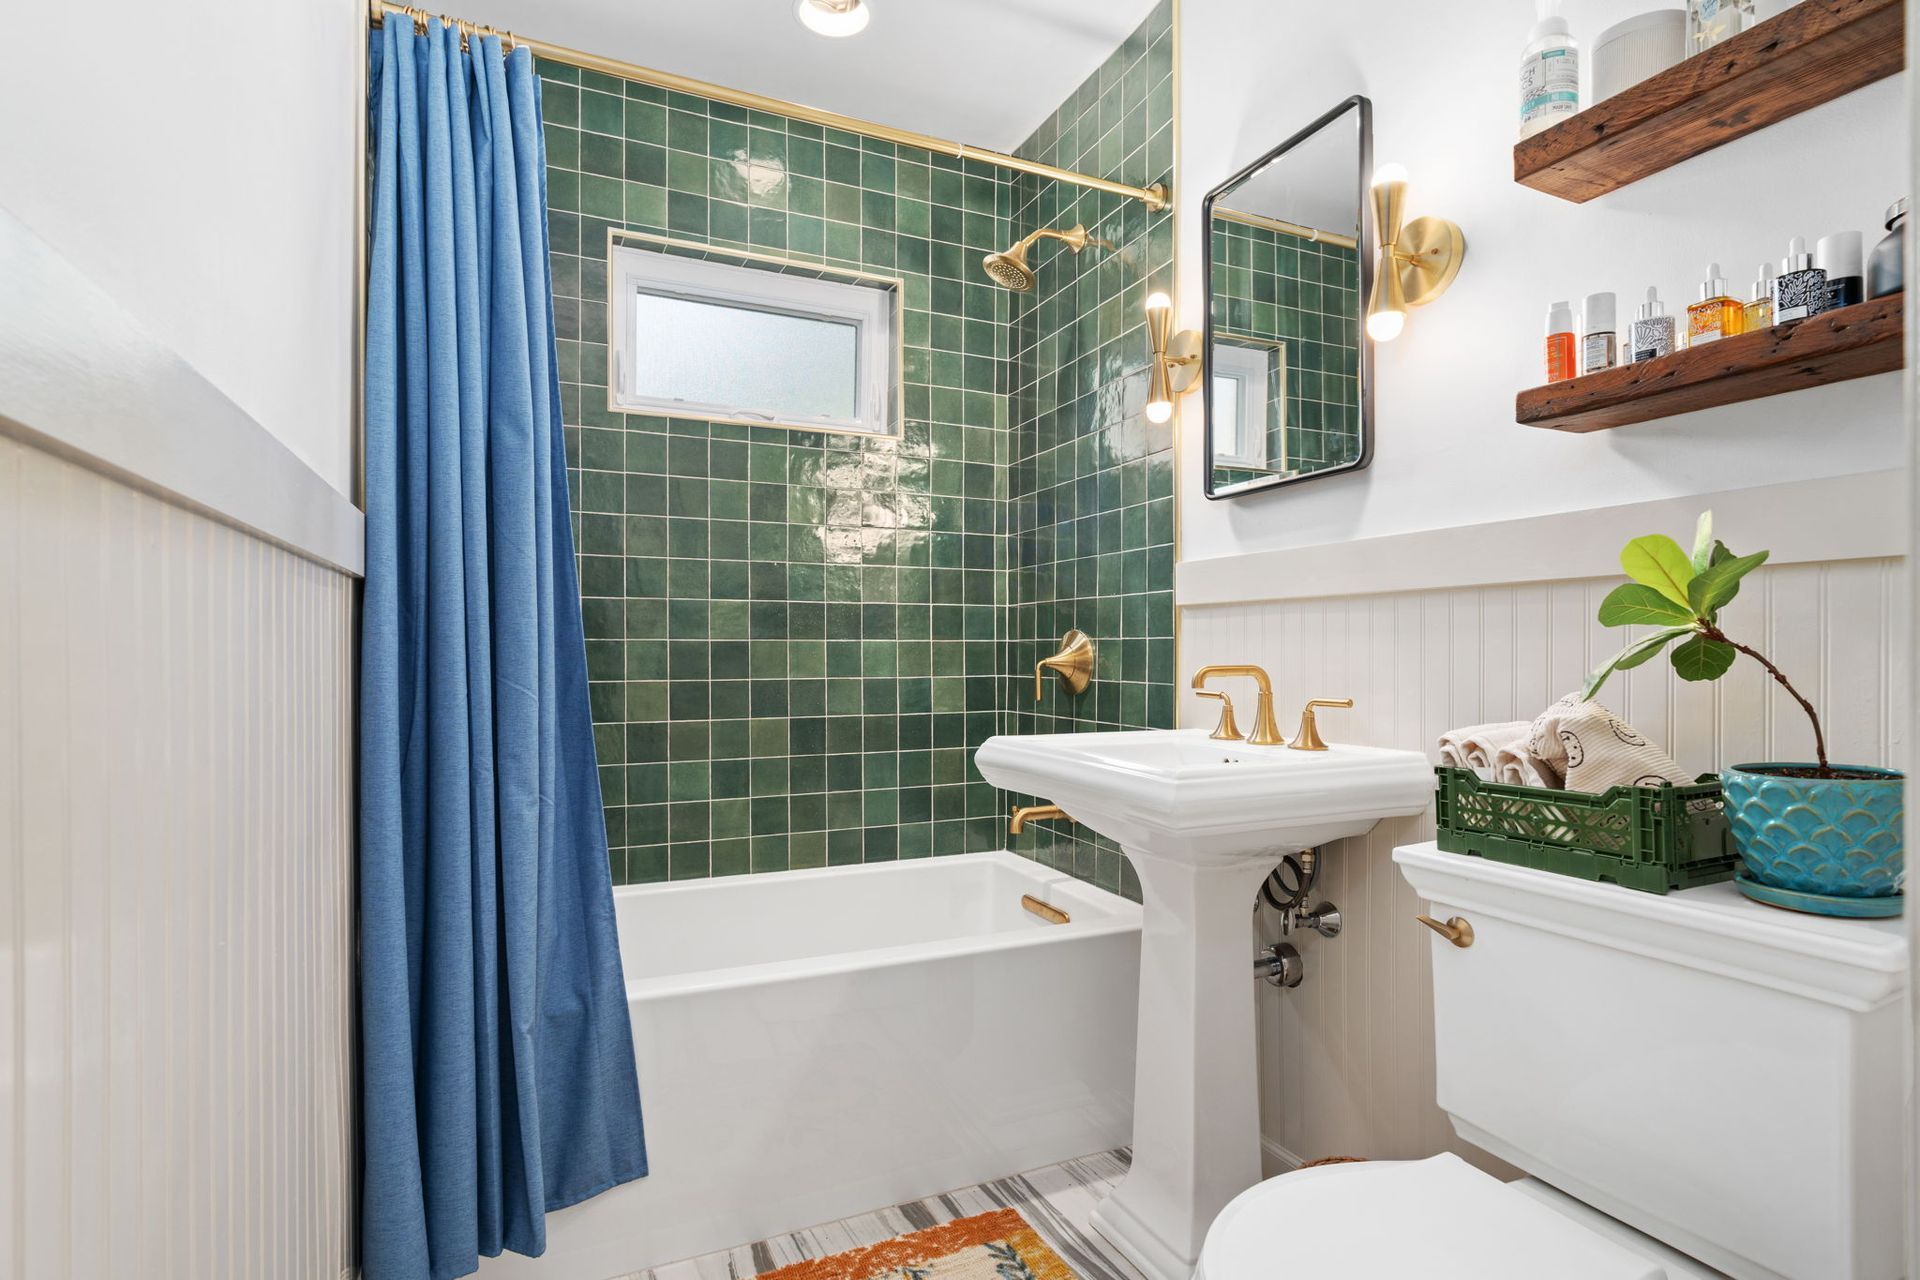 A bathroom with green tiles and a blue shower curtain.